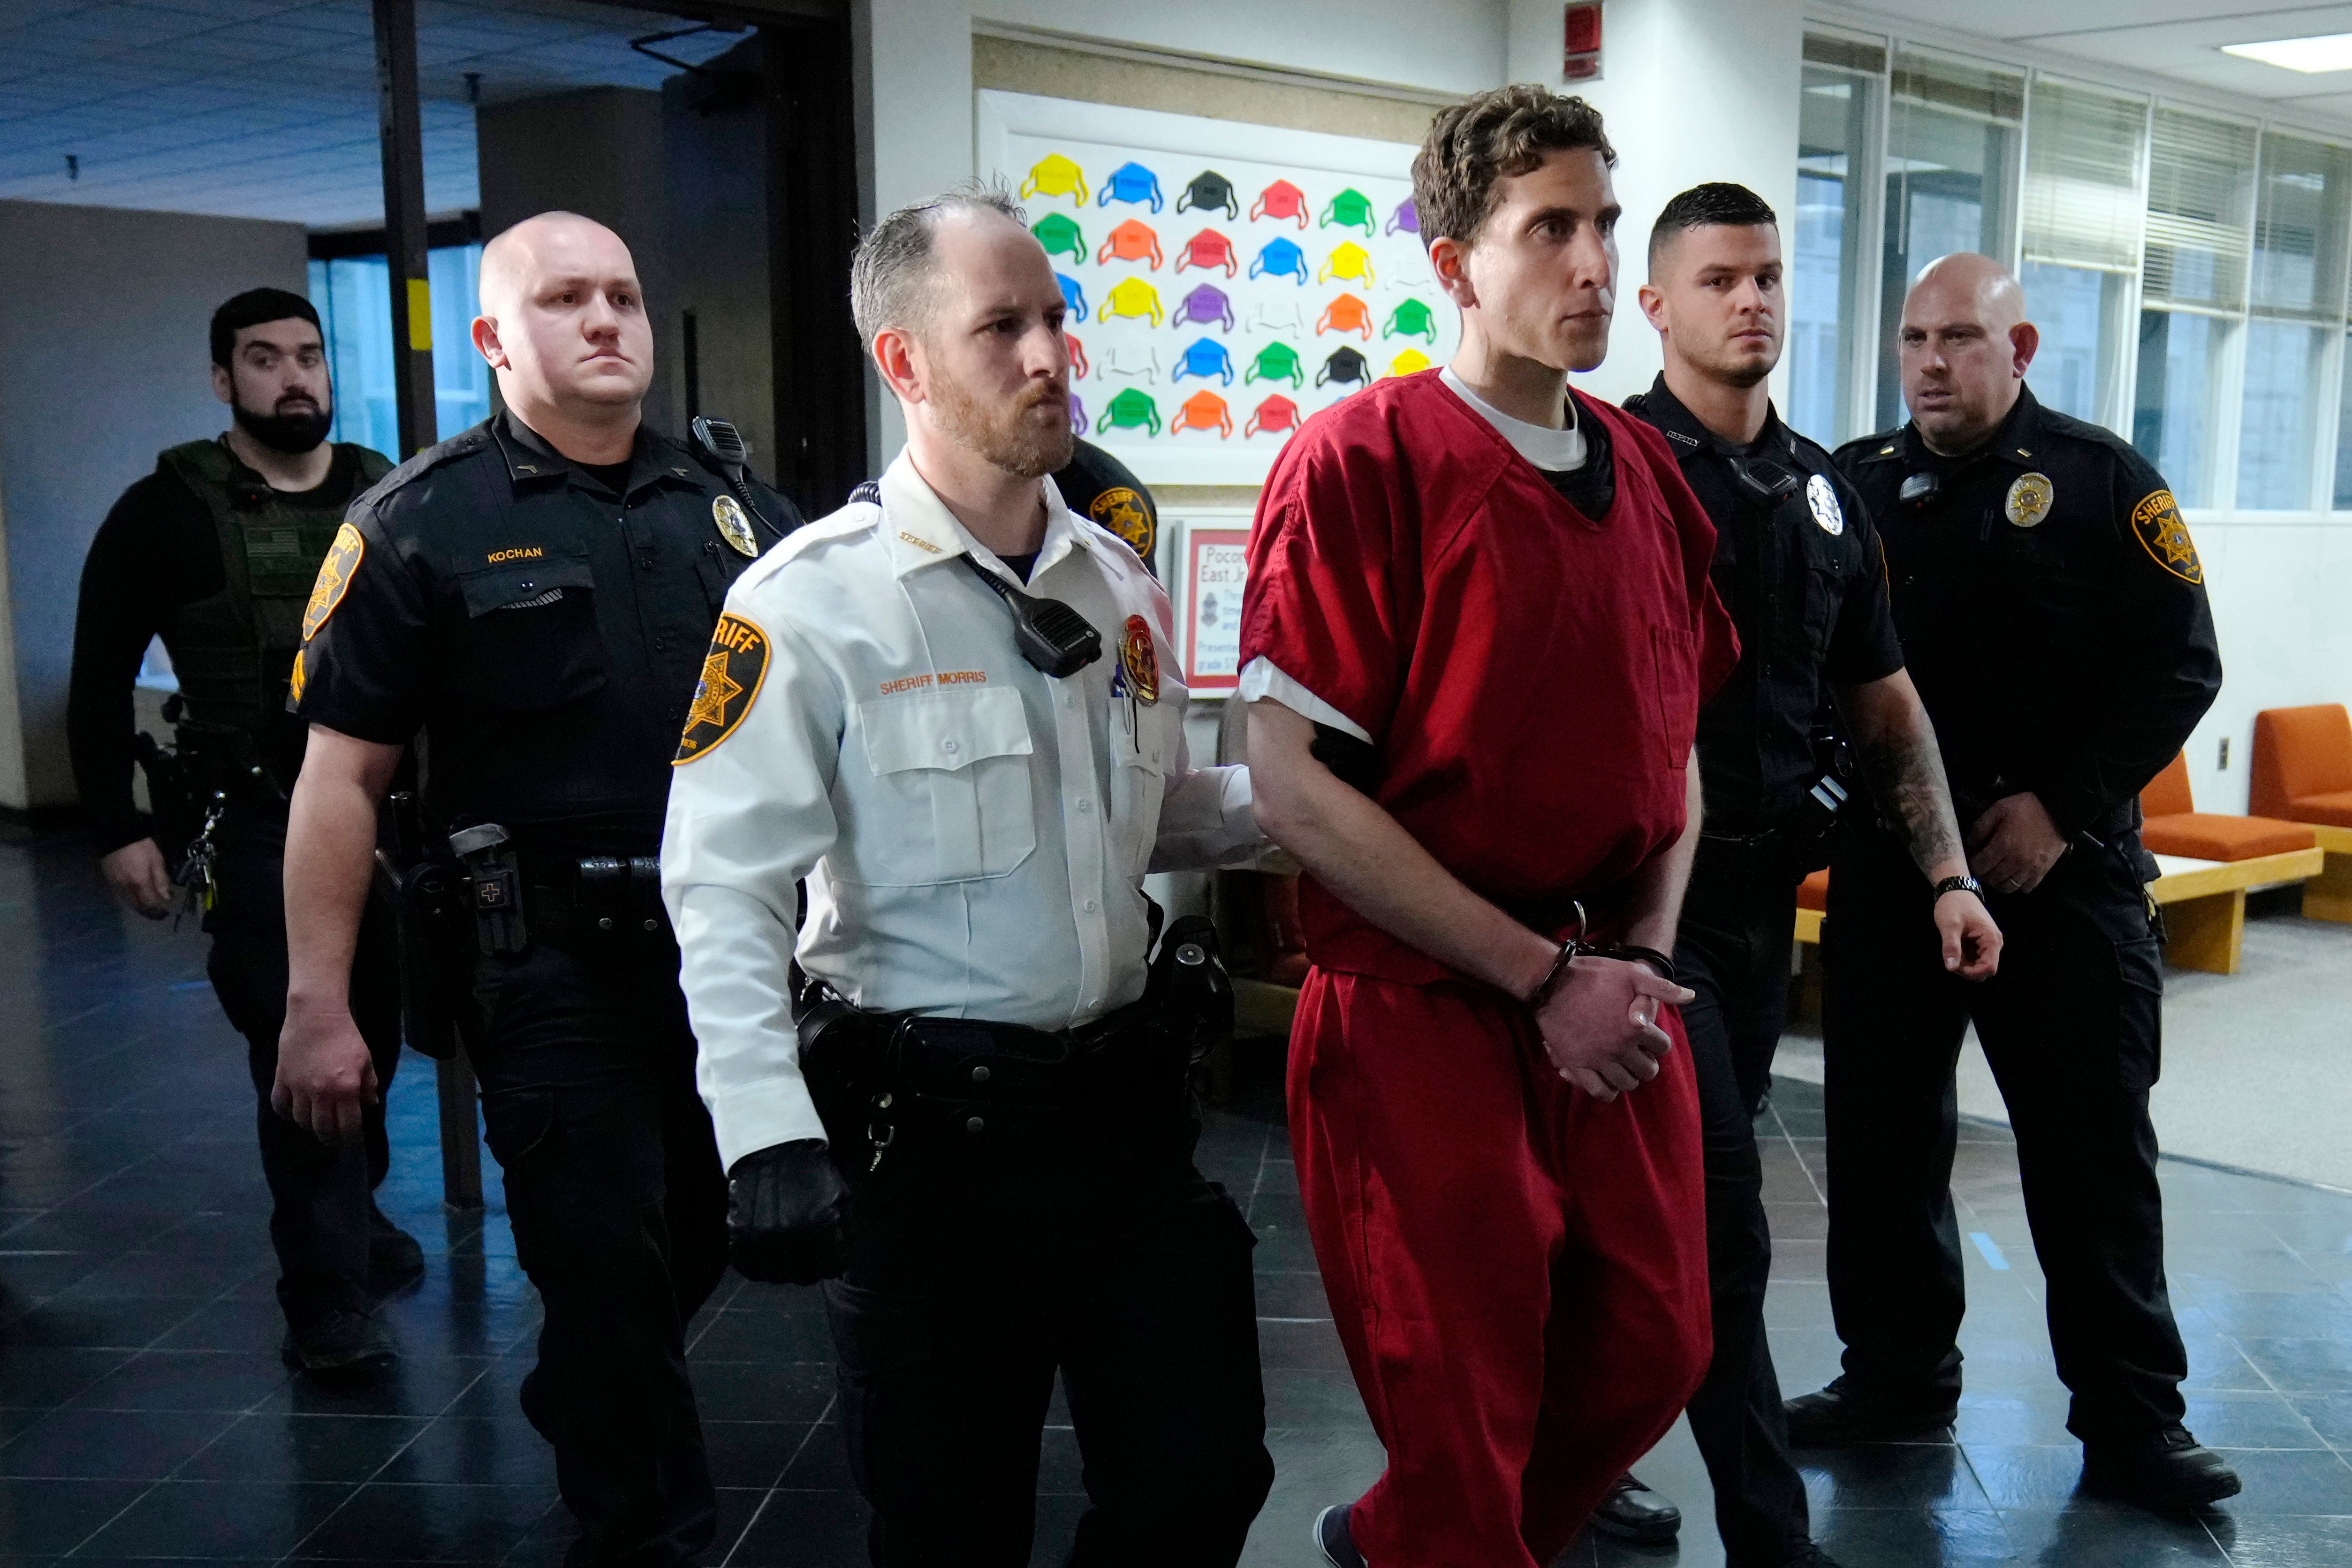 Kohberger, wearing an orange jumpsuit and handcuffs, is escorted down a hallway and flanked by several members of law enforcement.